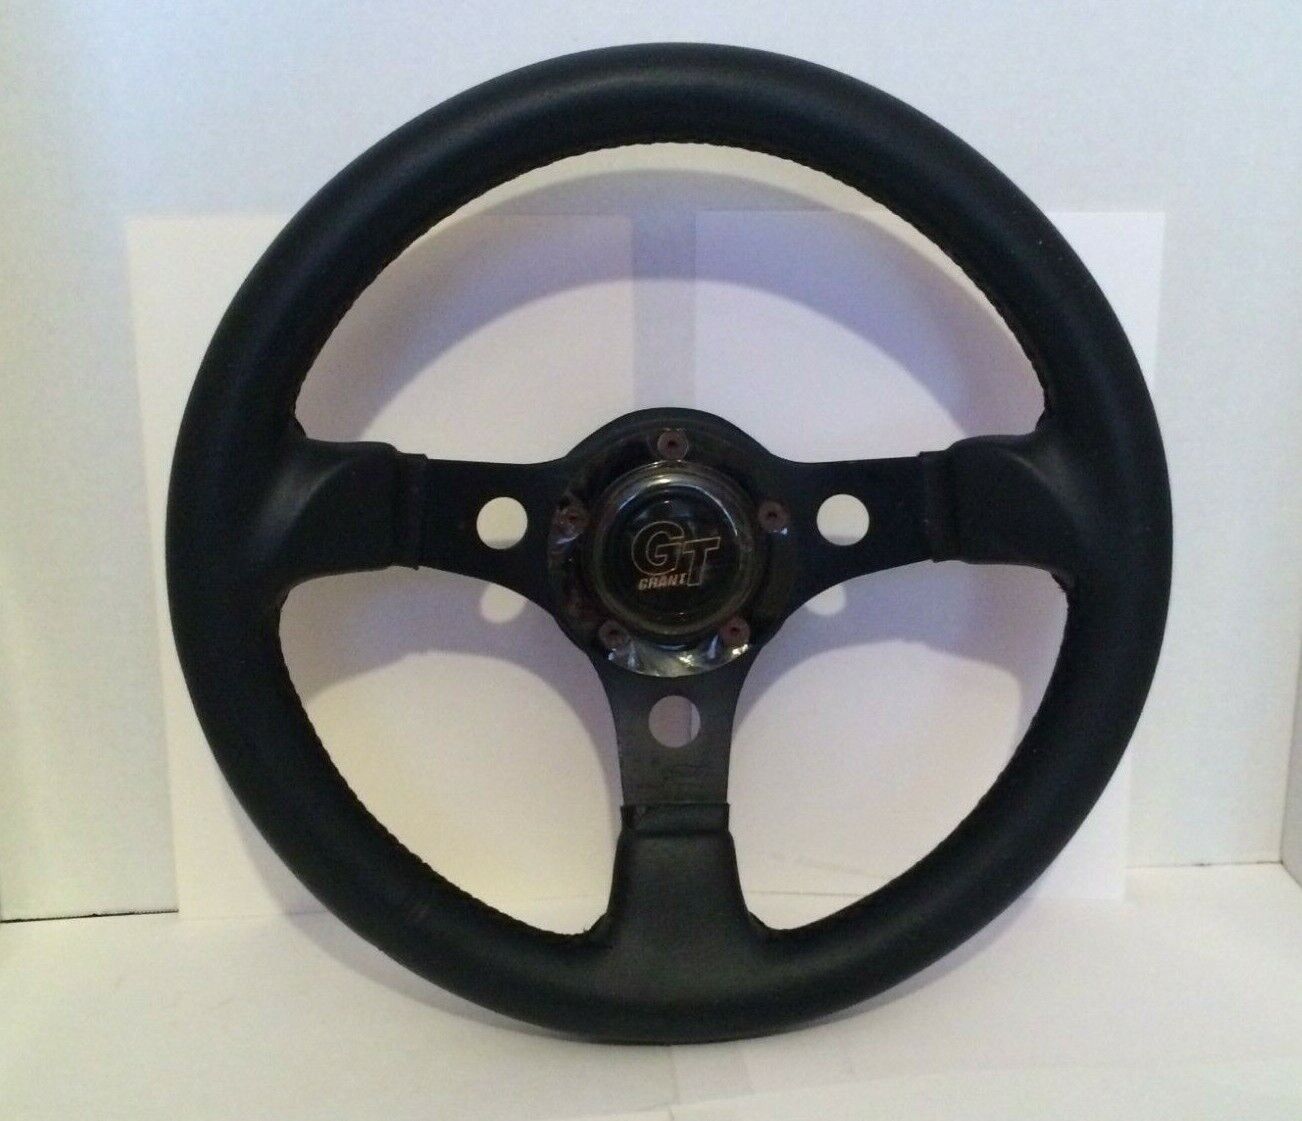 Grant GT Rally Formula Steering Wheel 3 Spokes 12 1/2 Inches VG +